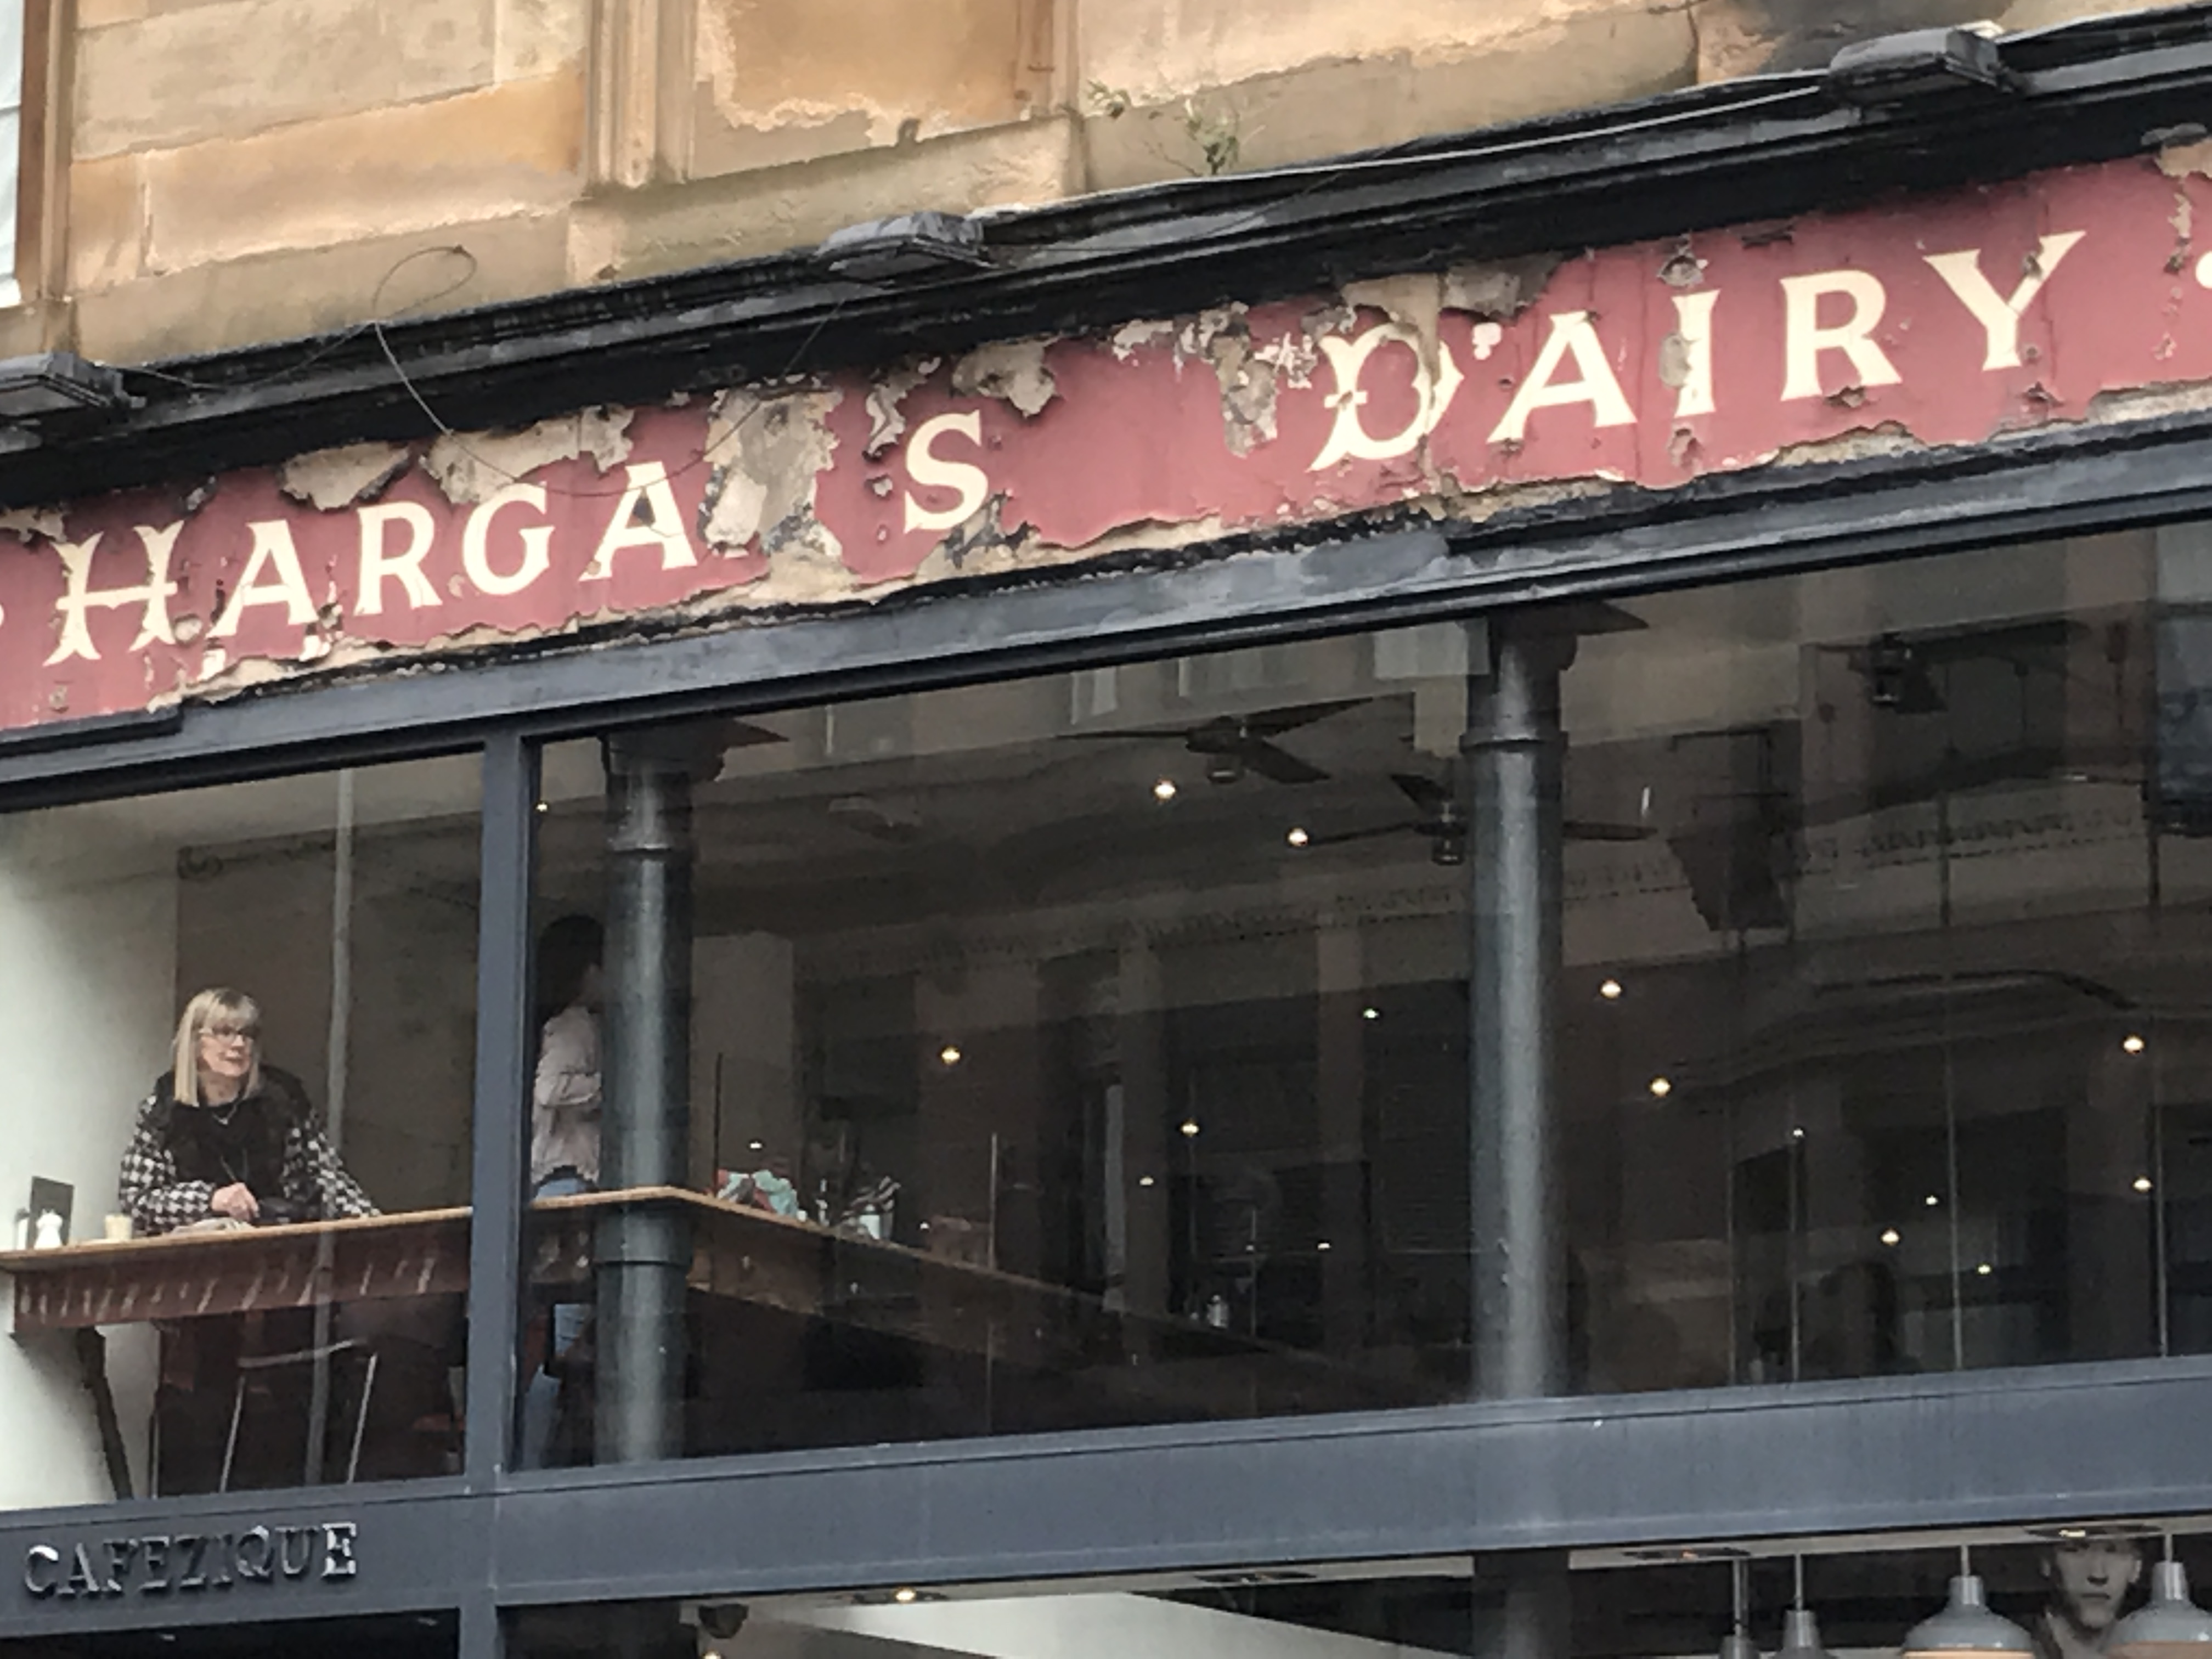 The old Hargans Dairy signage above Cafézique in the West End